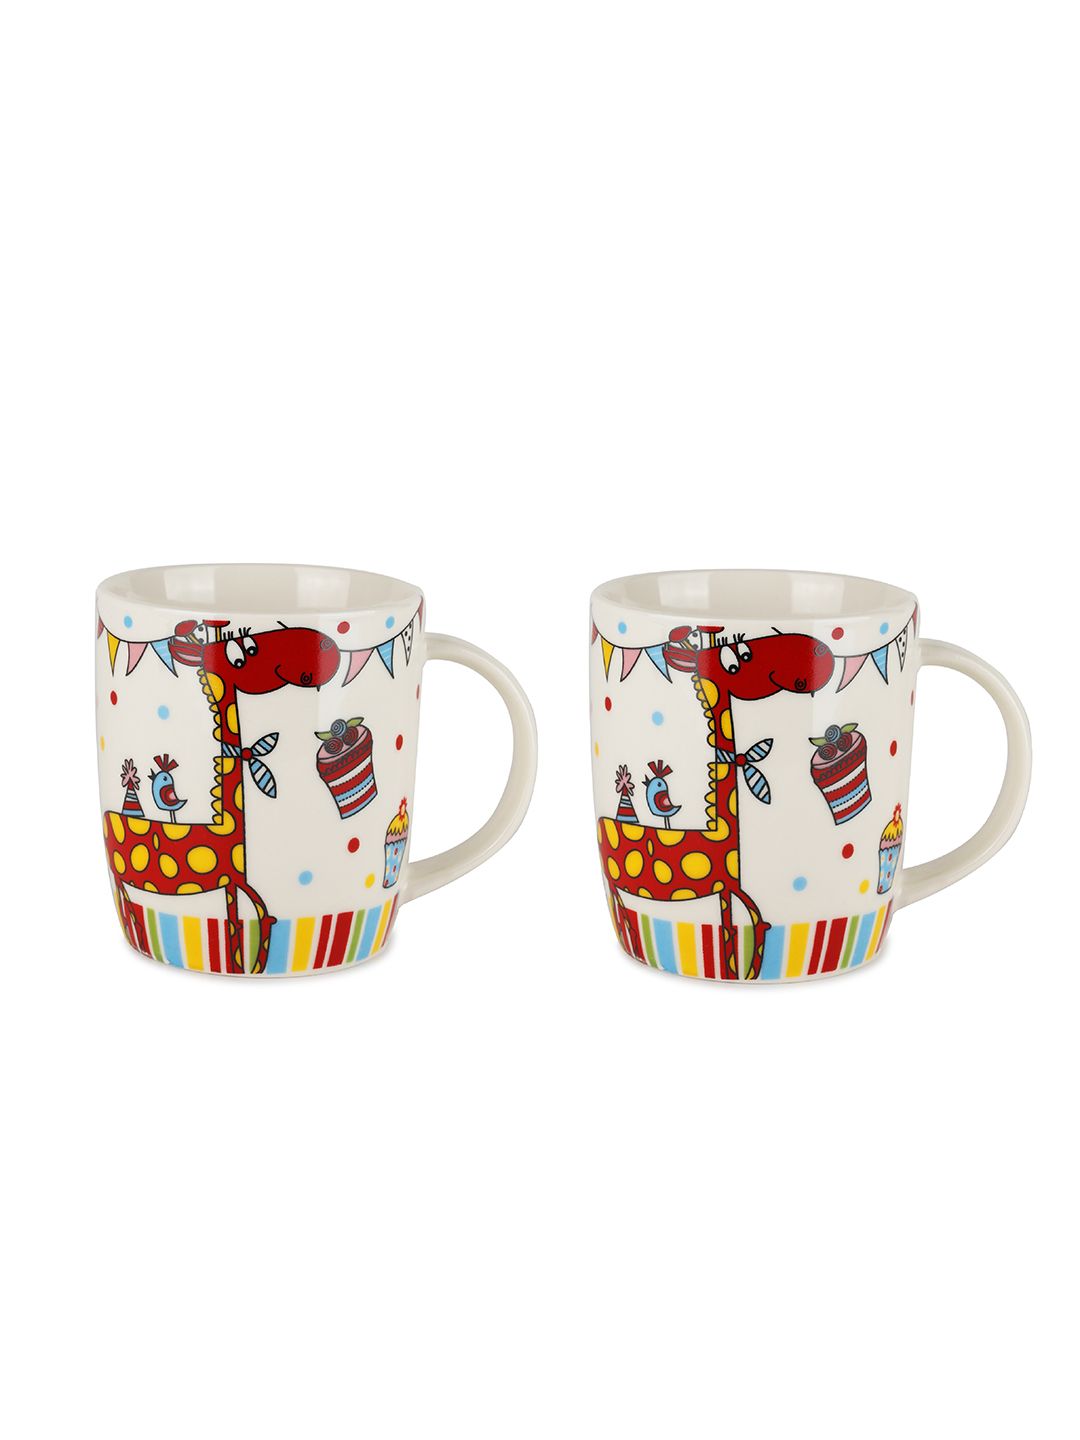 ZEVORA White & Red Set of 2 Printed Ceramic Glossy Mugs Set of Cups and Mugs Price in India